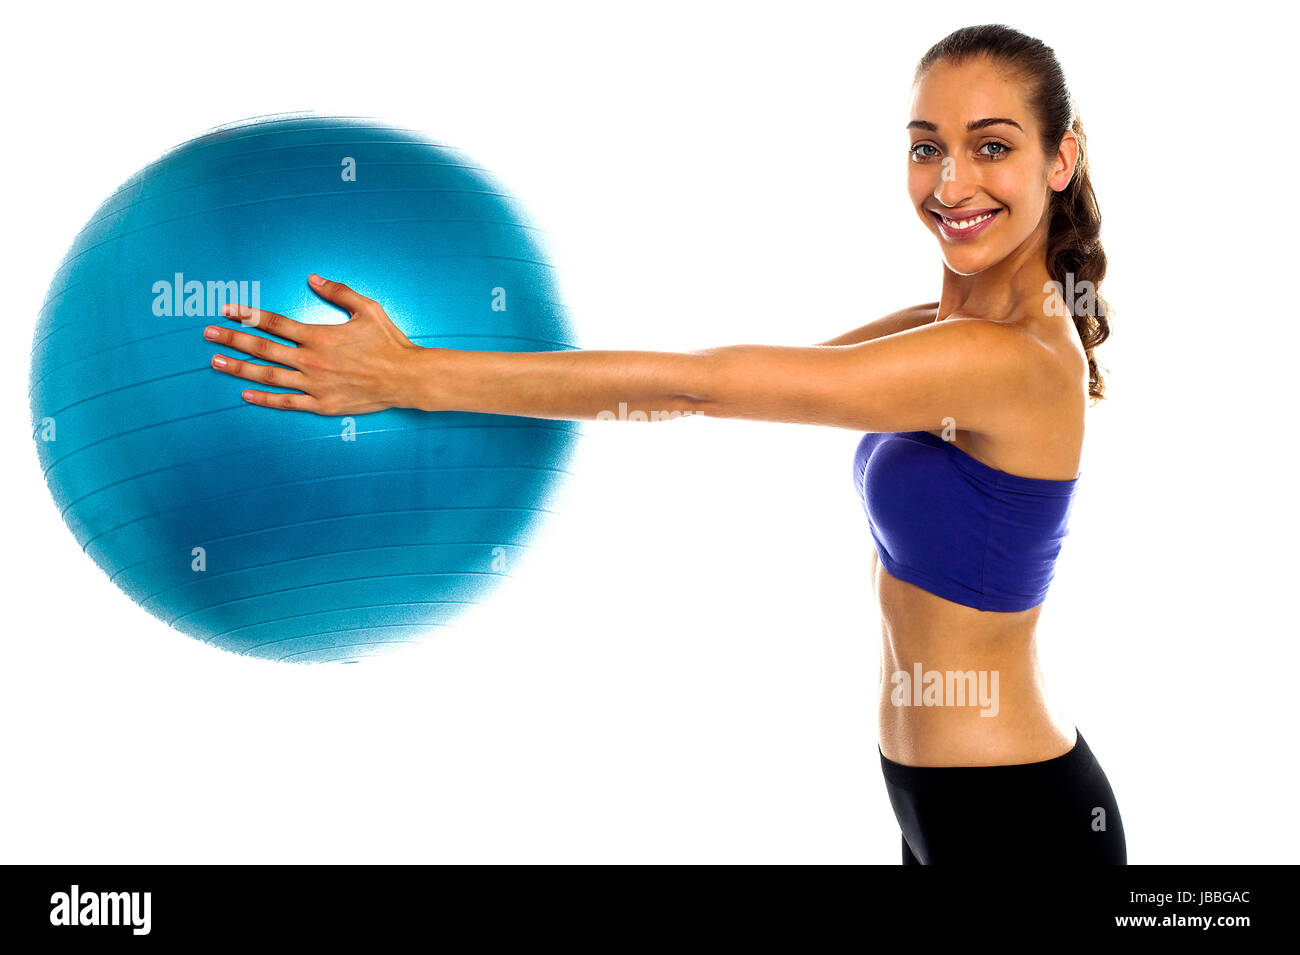 Side view of a fitness enthusiast holding a swiss ball. Casual shot Stock Photo